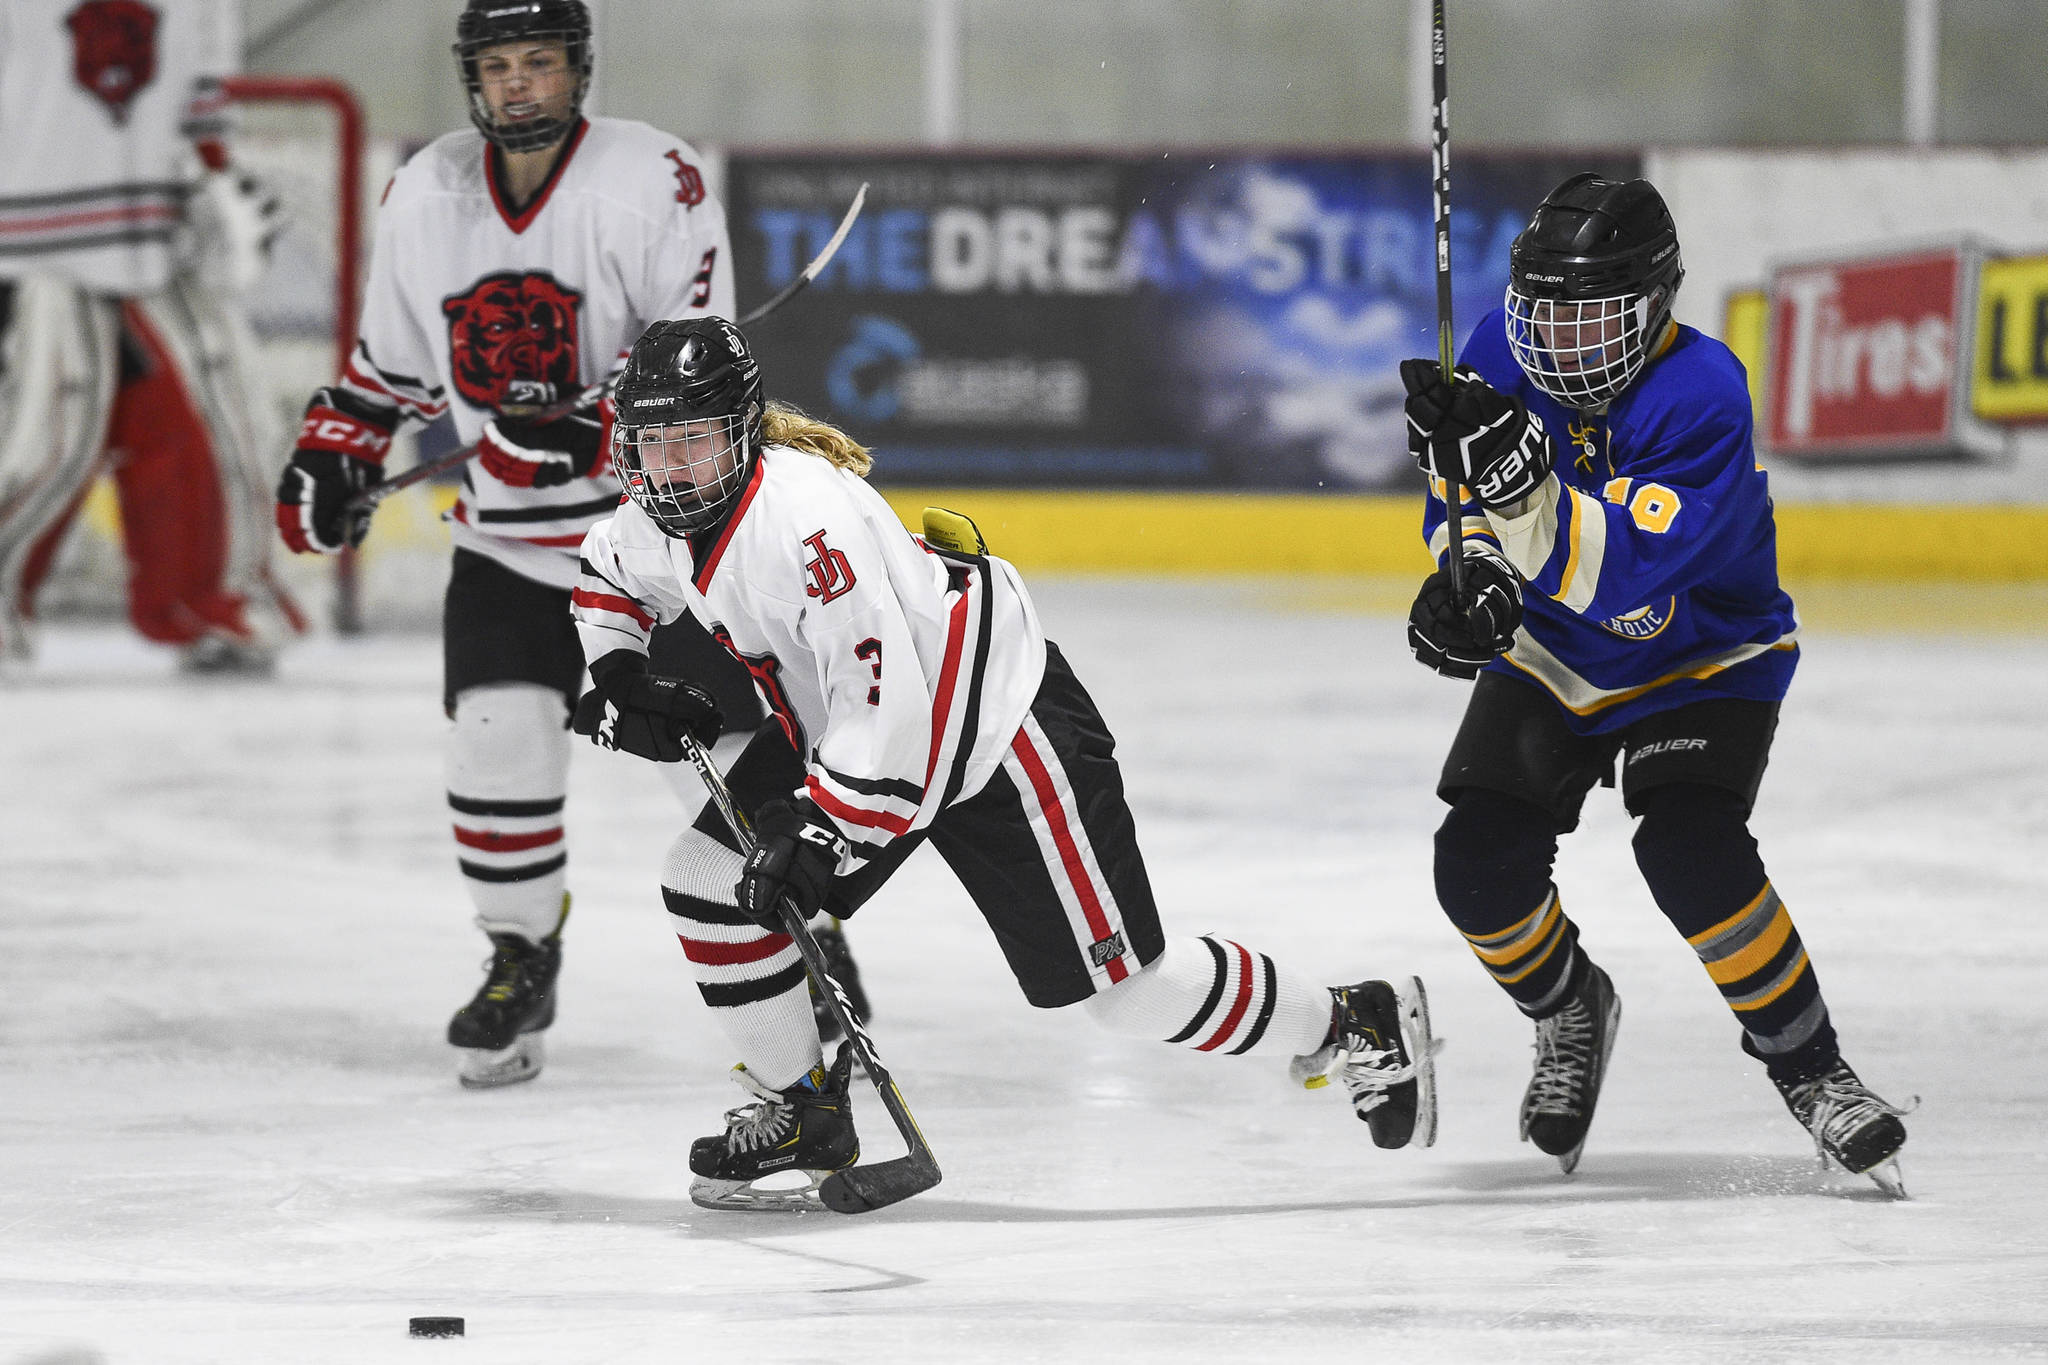 Juneau-Douglas’ Taylor Bentley moves the puck against Monroe Catholic’s Dom Coiley at the Treadwell Arena on Friday, Nov. 15, 2019. JDHS won 13-0. (Michael Penn | Juneau Empire)